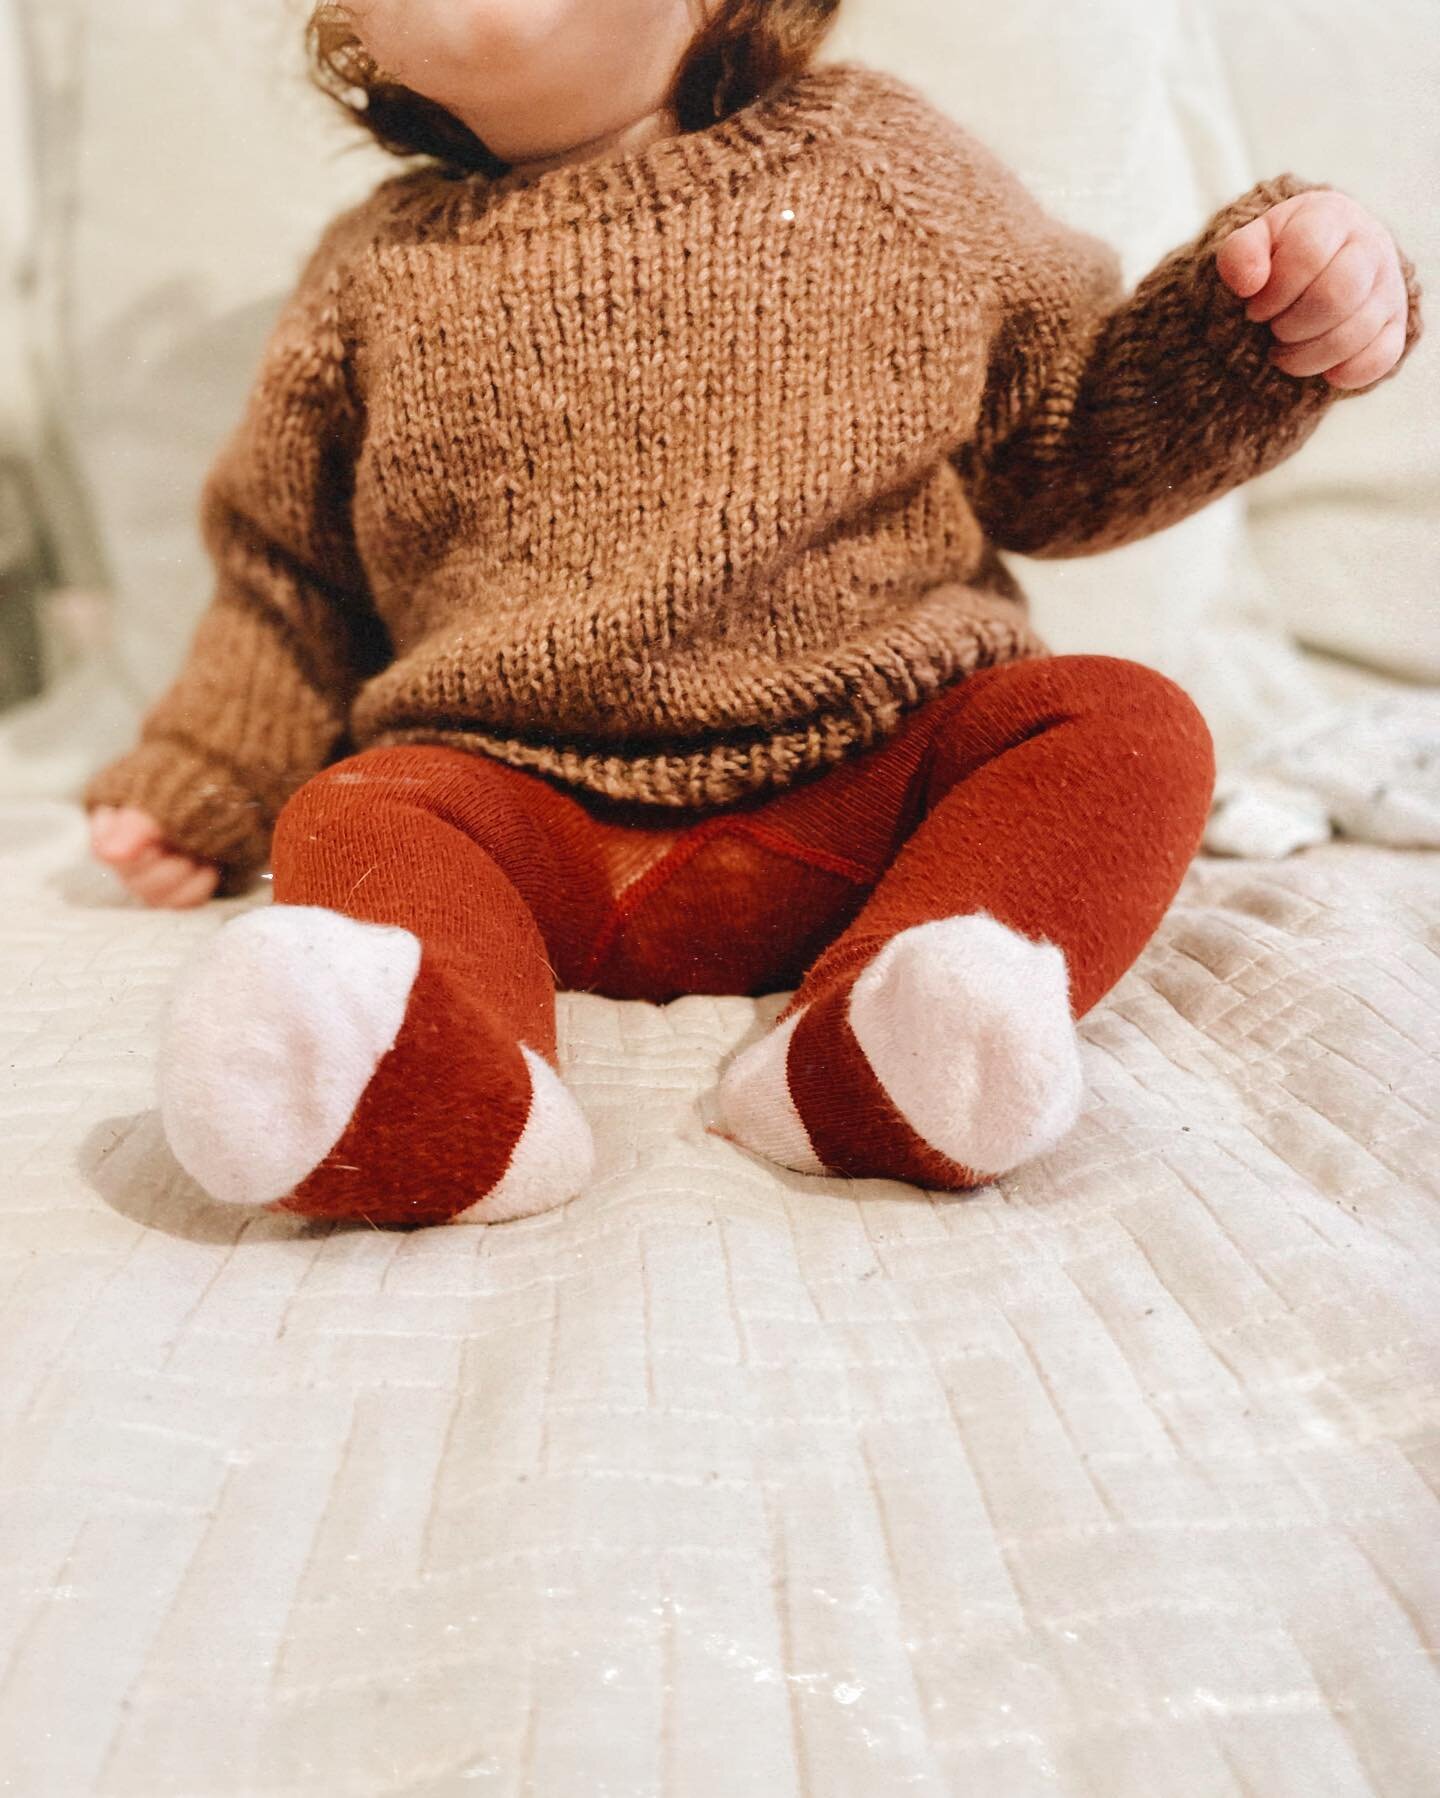 Baby sweater love 💕

I&rsquo;m so excited that this teeny tiny sweater fits exactly how it was supposed to. My little one looks extra cute when wearing it, and I love hugging her and feeling that extra softness (@dropsdesign Air is definitely a win!